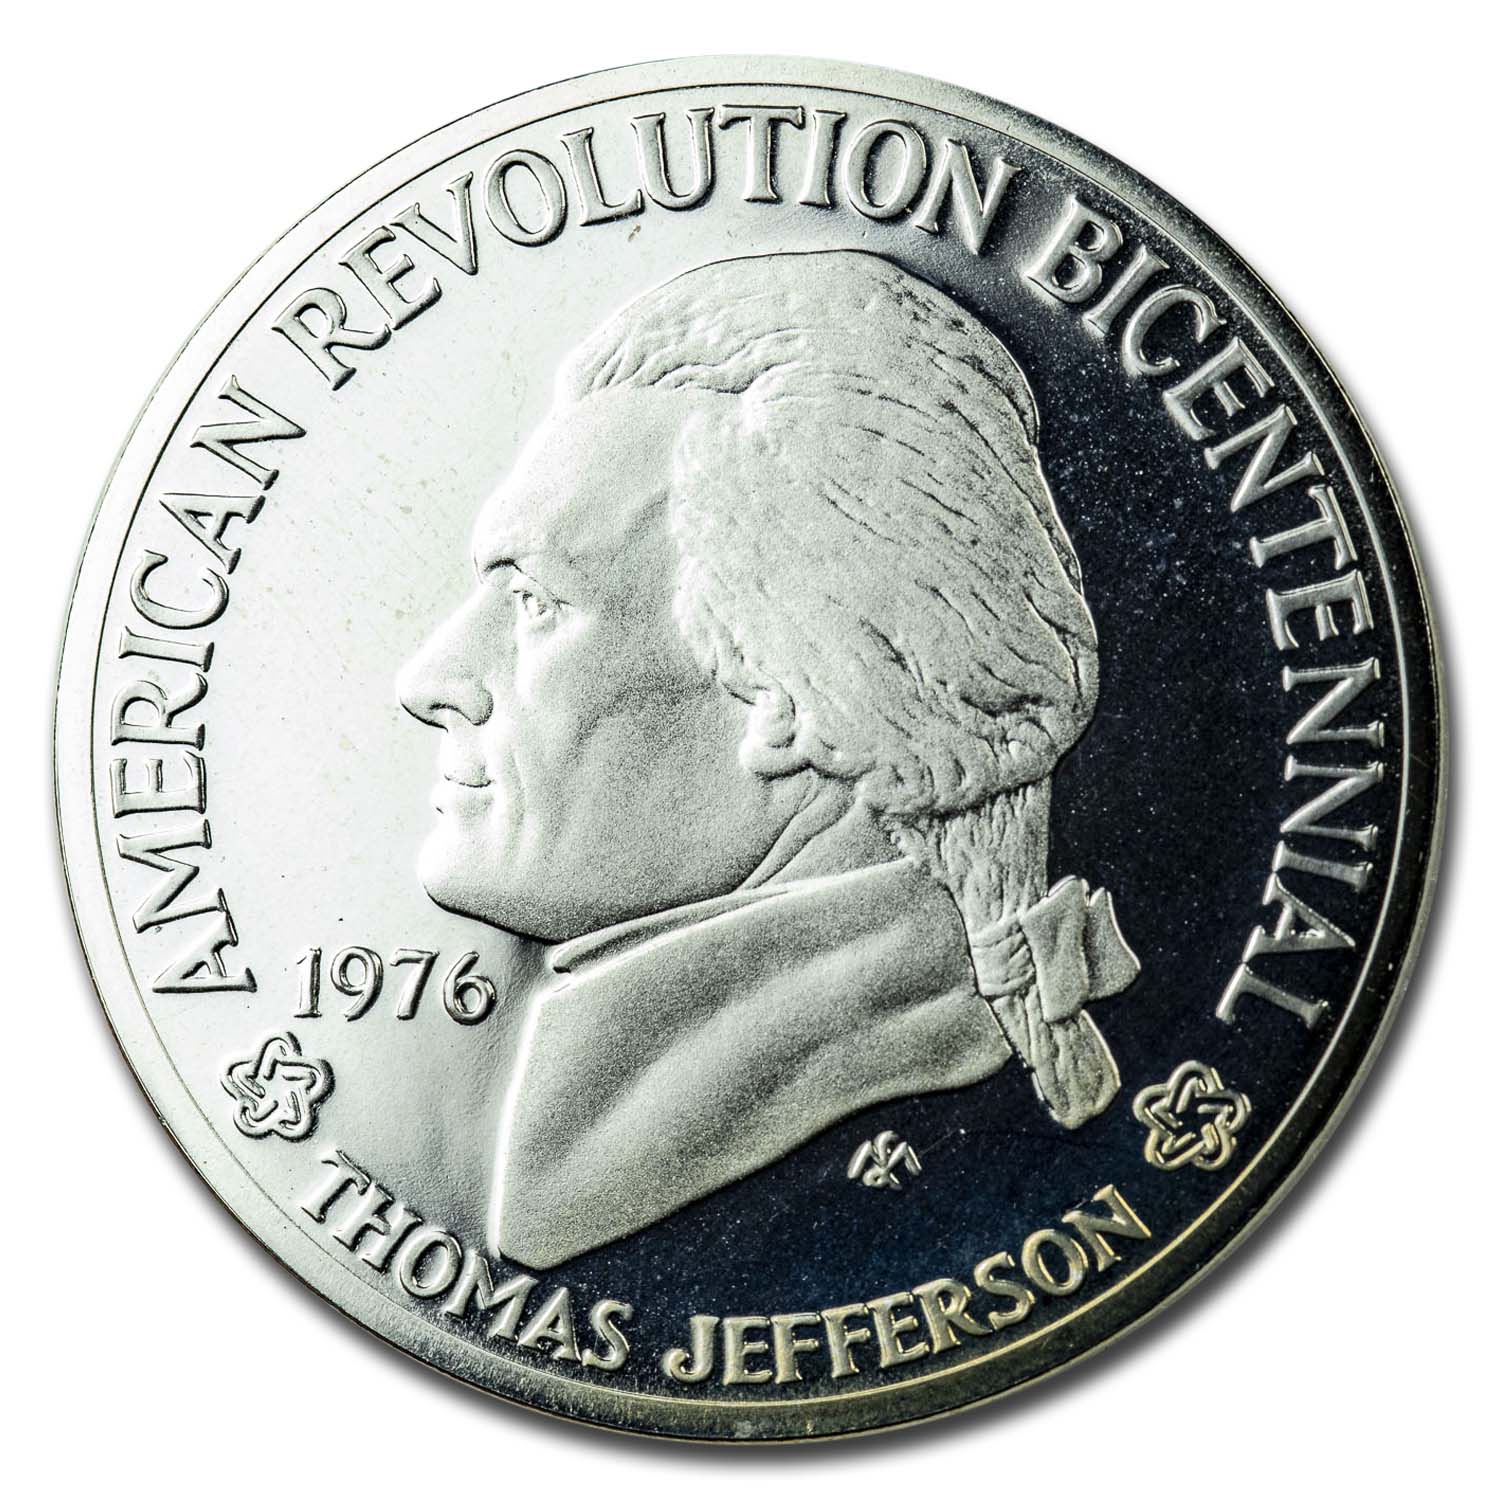 1976 Thomas Jefferson American Revolution Bicentennial Commemorative Sterling Silver Medal with display box and fact sheet